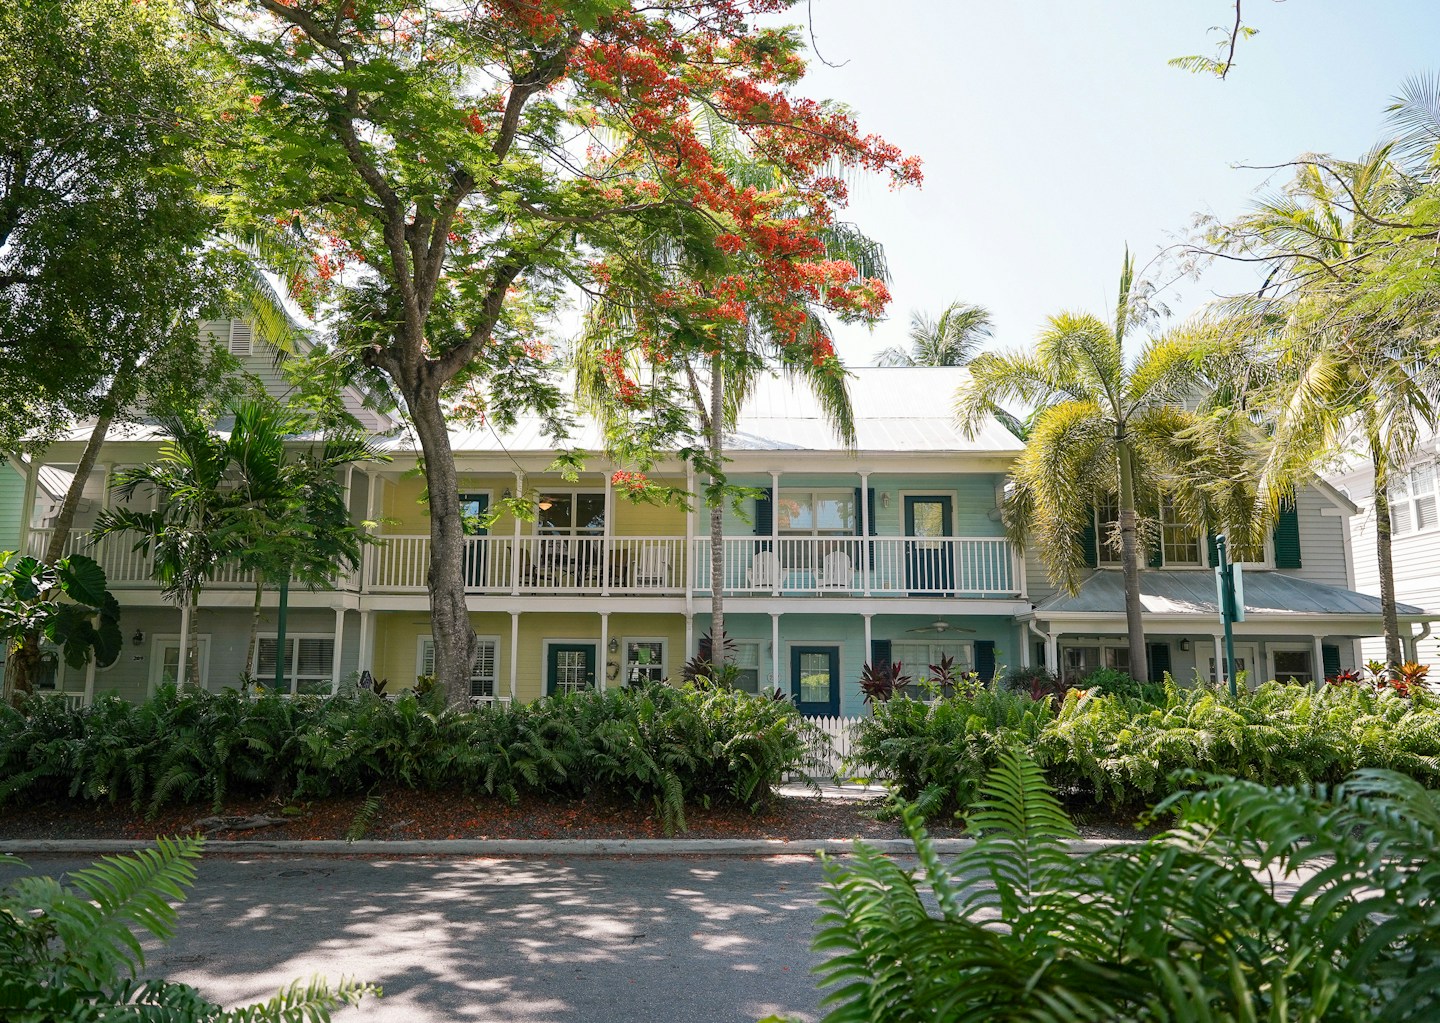 Key West has charming architecture, history and nightlife - this is a must-do day trip from Marathon Florida.